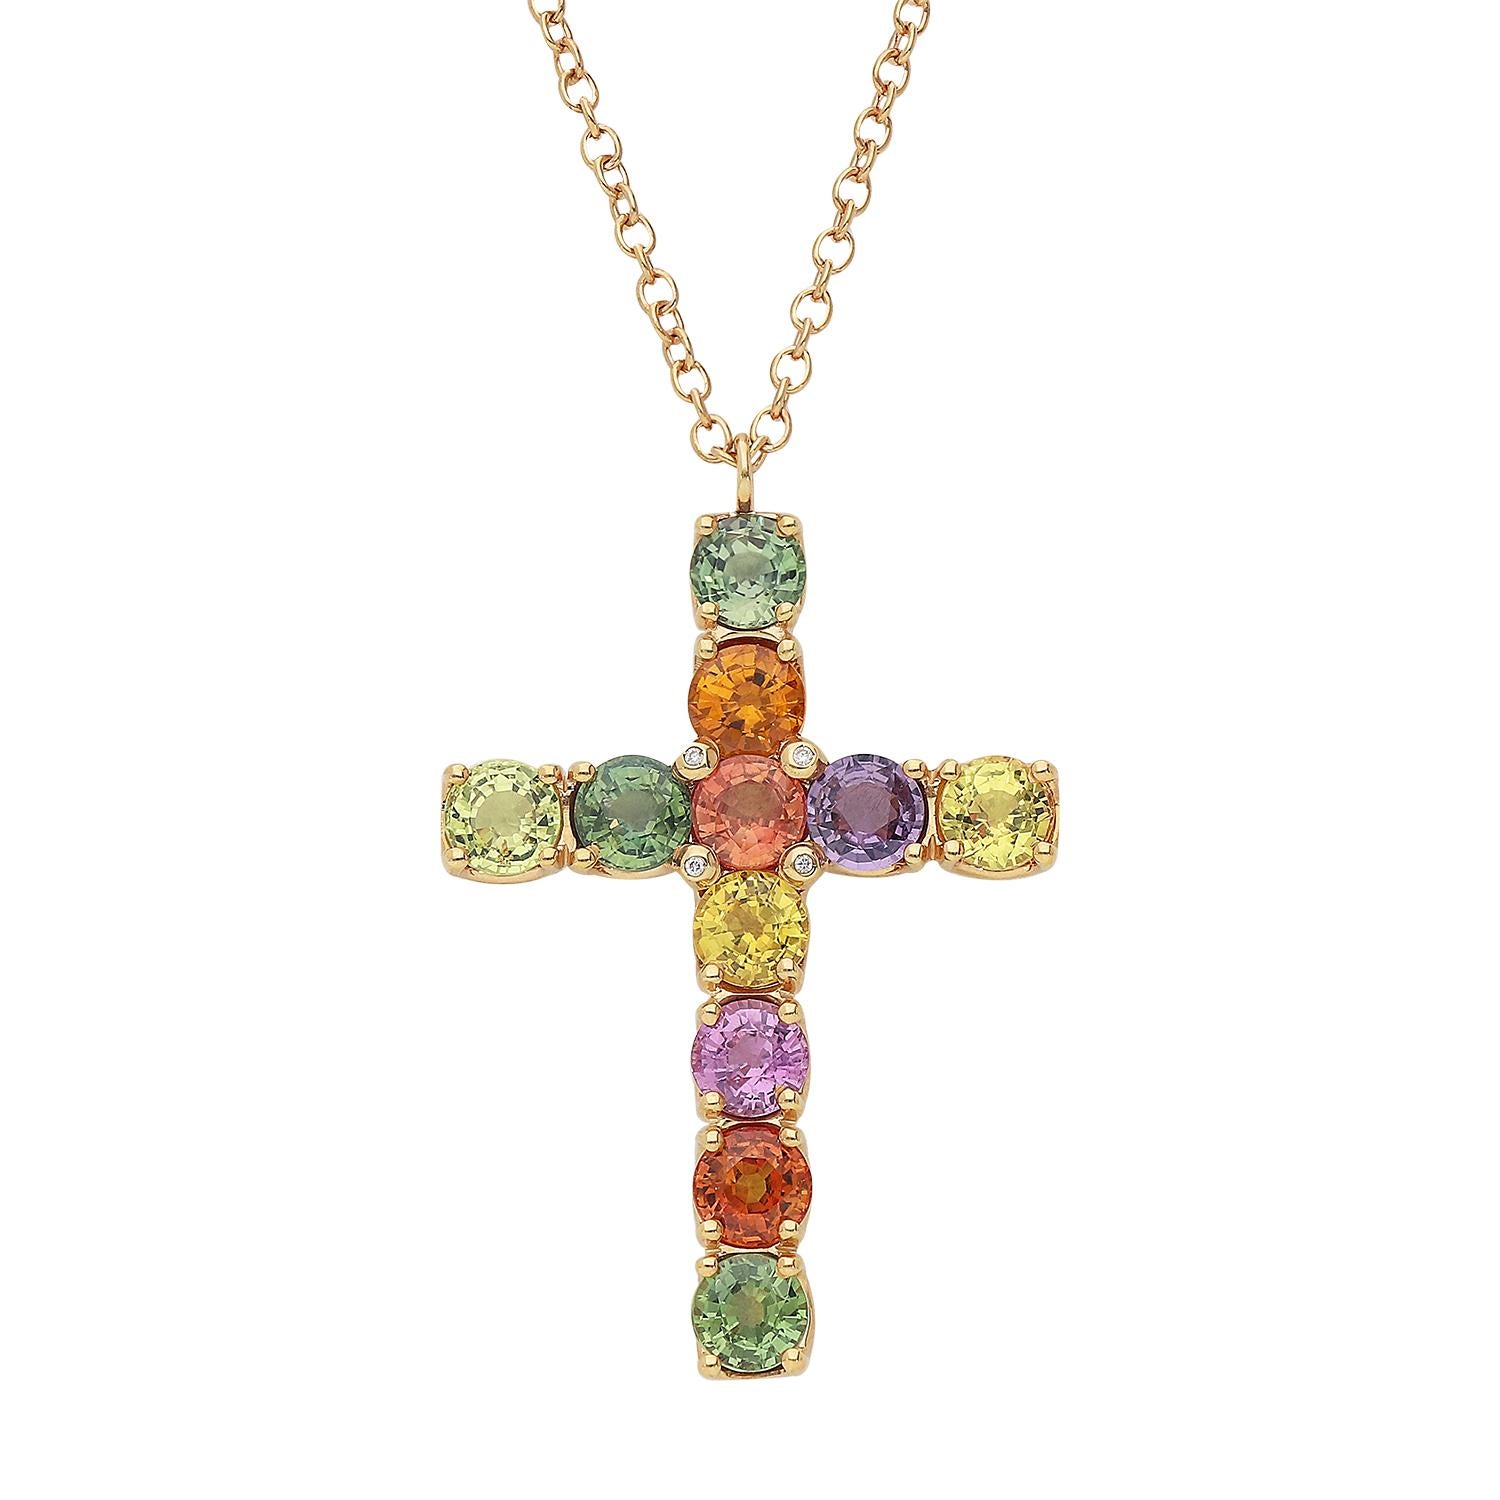 A stunning 18kt rose gold cross pendant choker weighing a total of 11.40 grams with multi-color brilliant-cut sapphires totaling 8.19 carats. On either side of the central sapphire, and on the chain, are brilliant-cut diamonds, color G clarity SI,